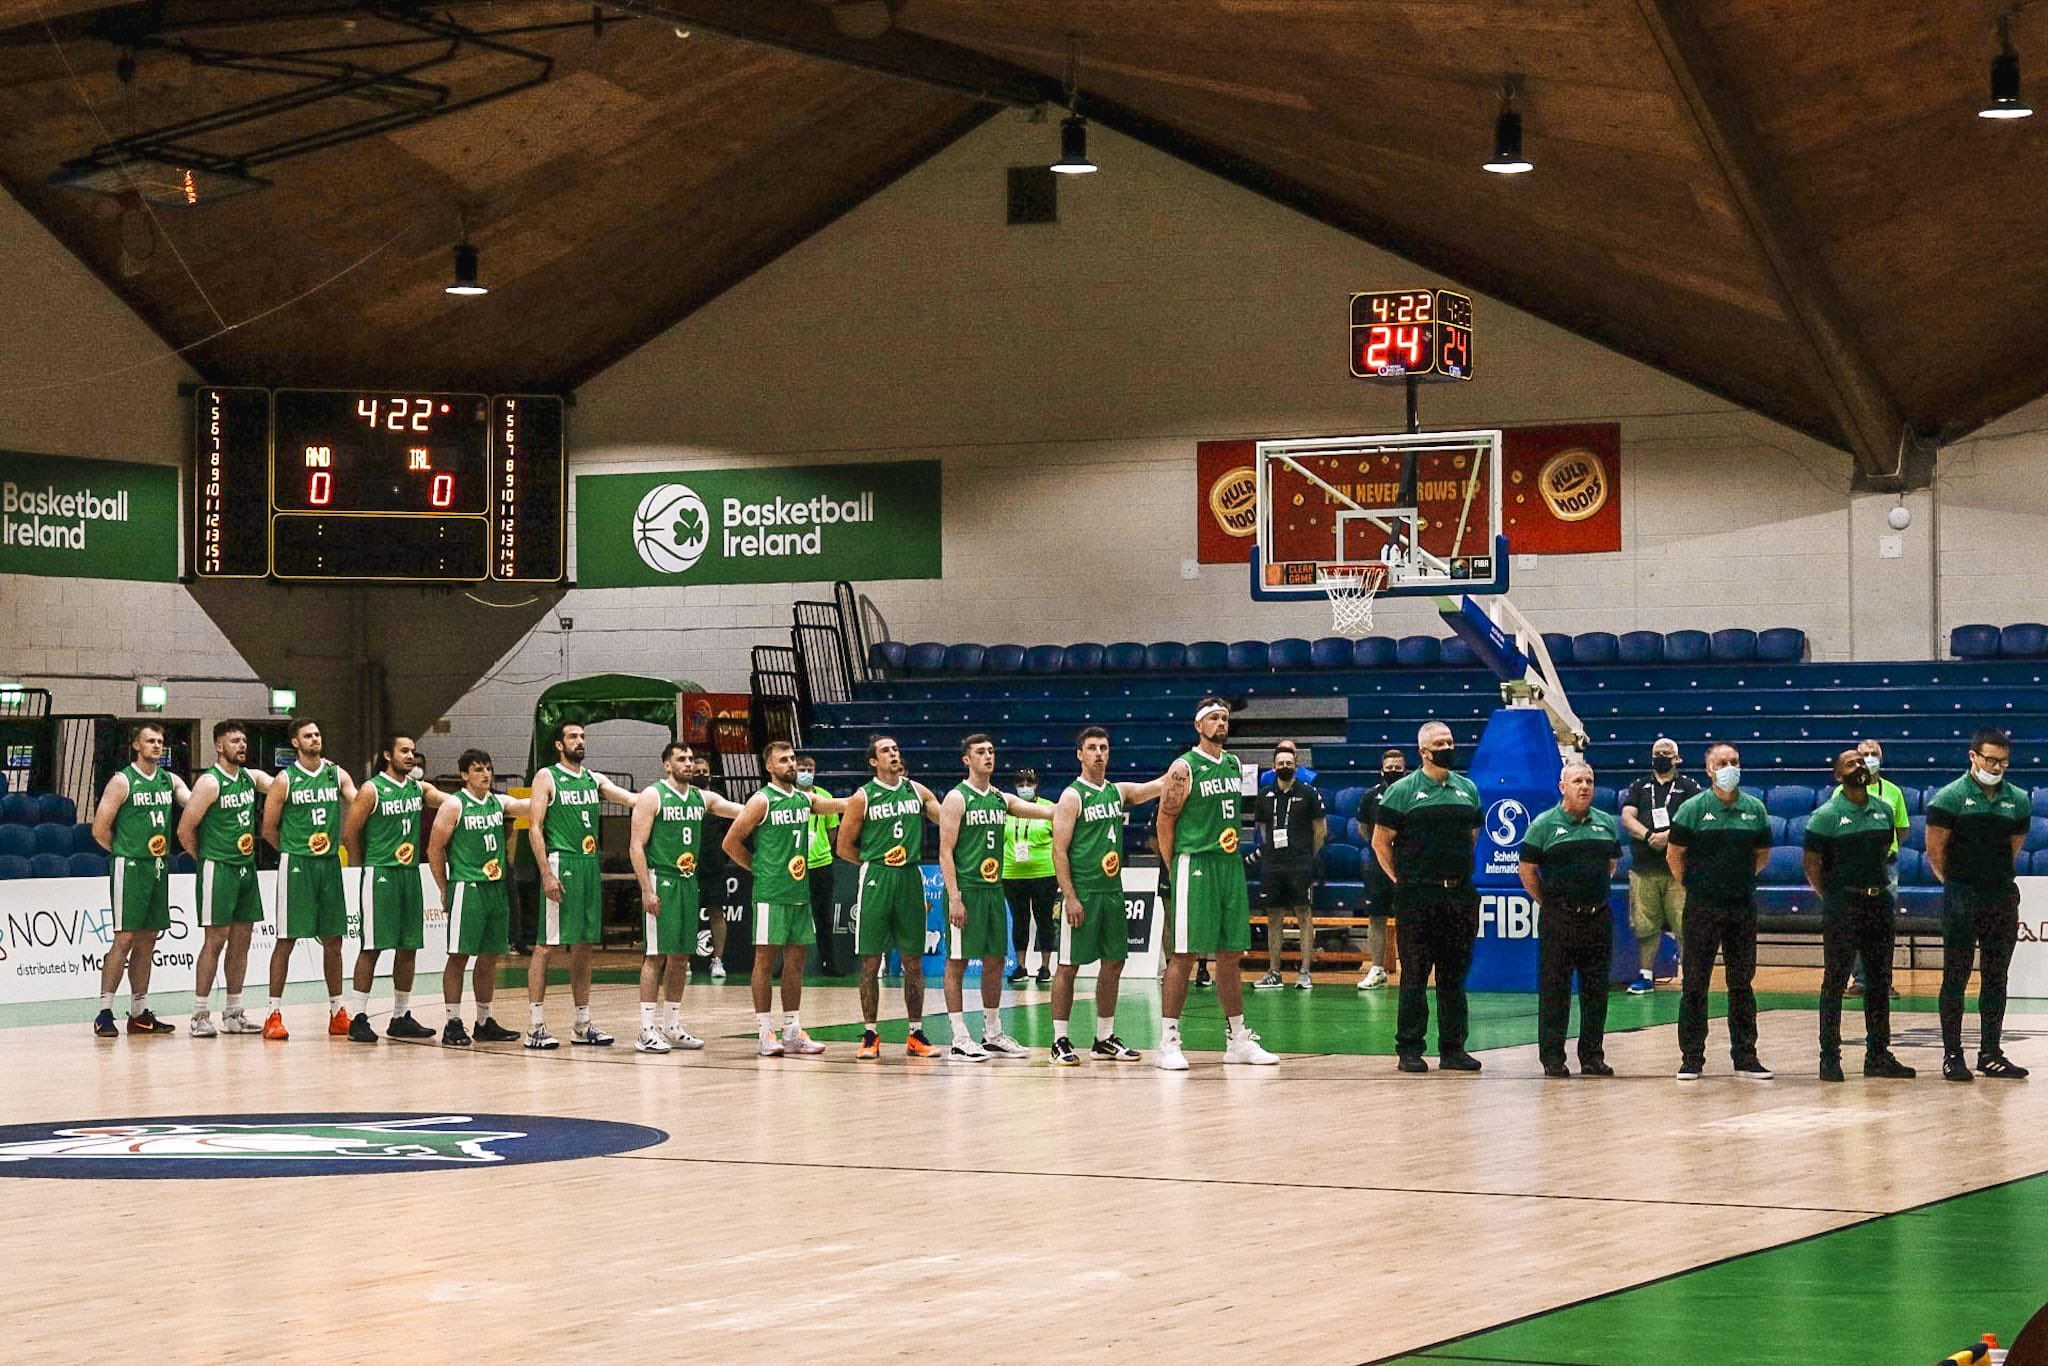 The Ireland men's basketball team standing for the national anthem ahead of their clash with Andorra at the 2021 FIBA European Championships for Small Countries